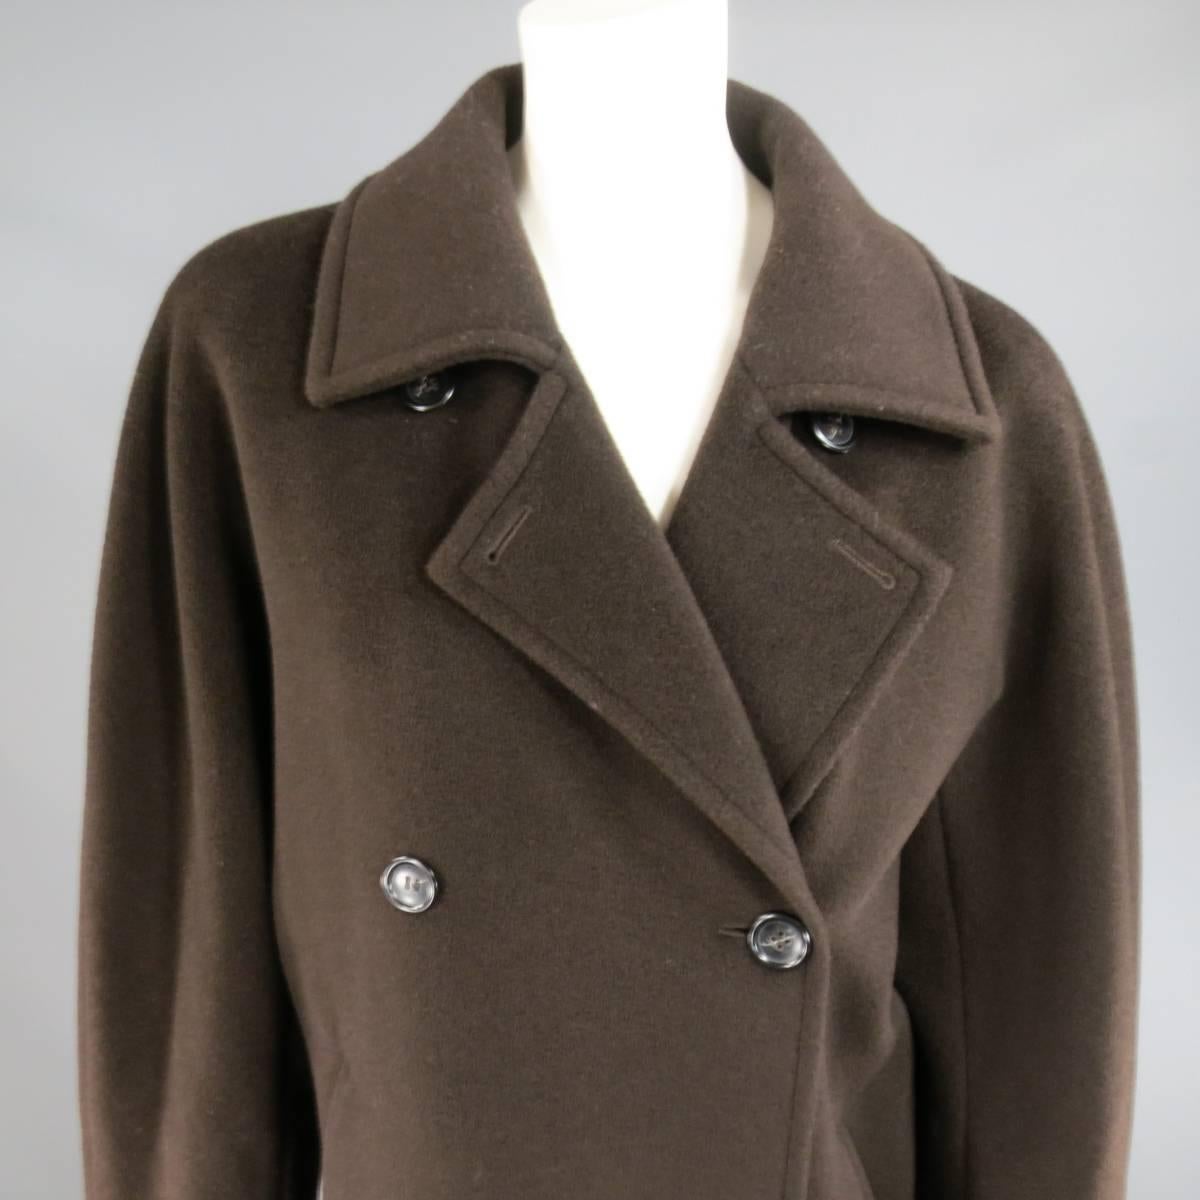 This gorgeous vintage MAX MARA coat comes in a chocolate brown virgin wool fleece fabric and features a large, pointed collar, round seamless shoulder, double breasted button up closure, oversized silhouette, and double slanted slit pockets. Made in